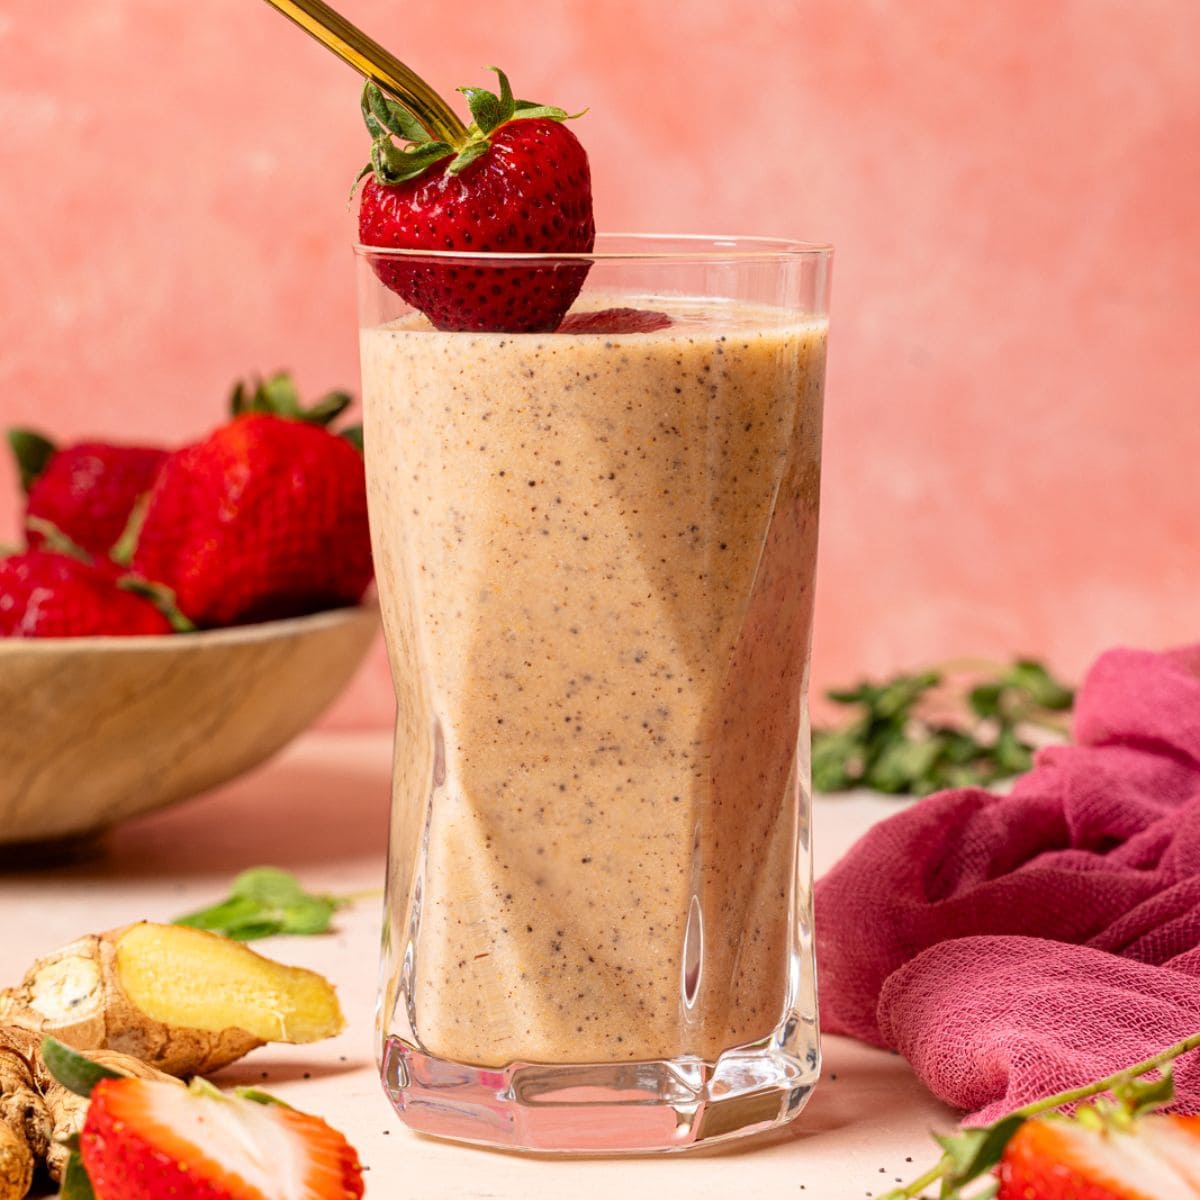 One glass of smoothie with fresh strawberries, ginger, and herbs.